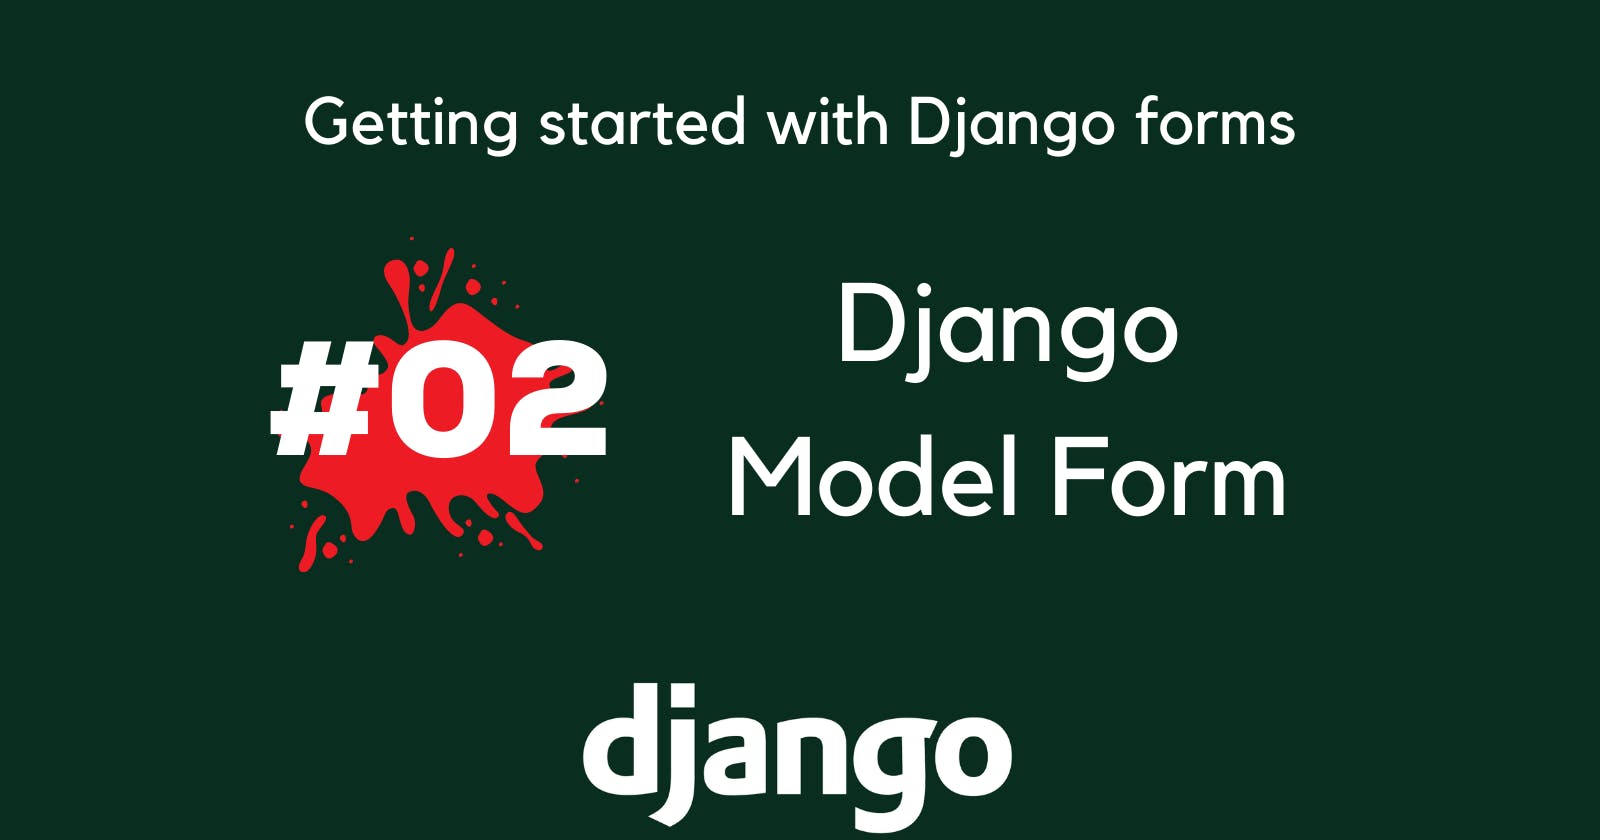 Learn how to use Model forms in Django